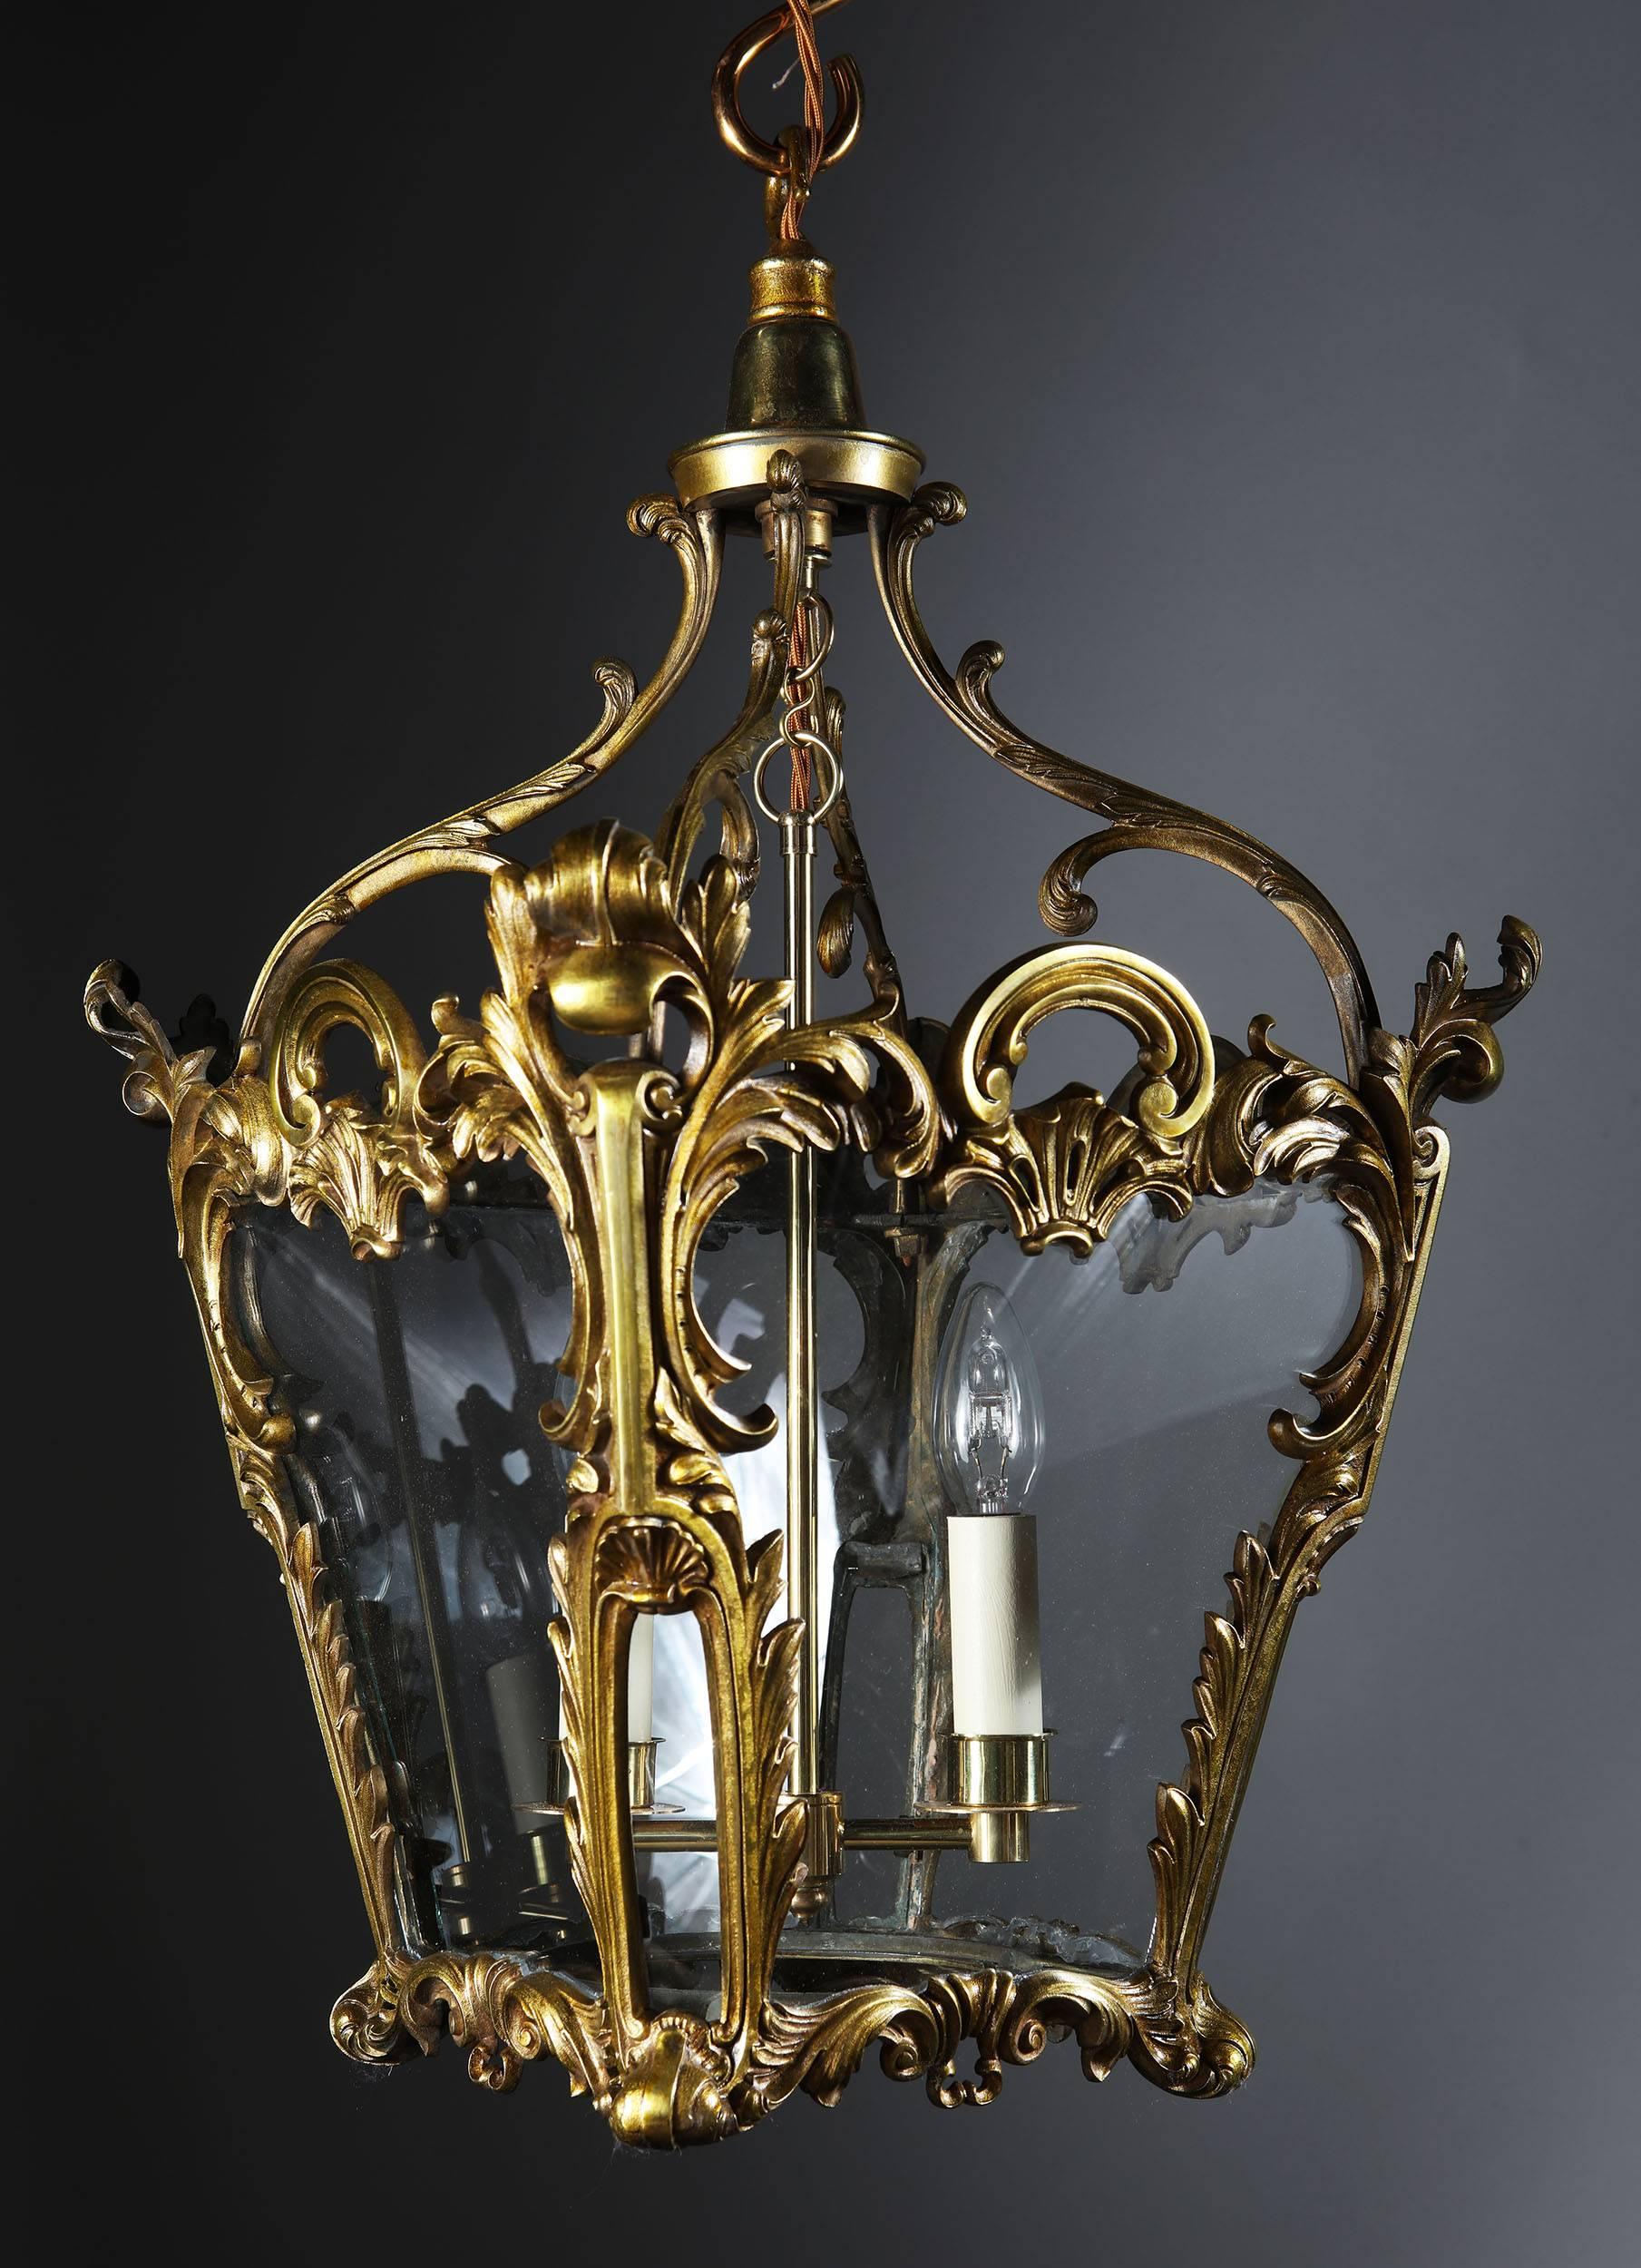 A Rococo Revival brass chandelier, of square tapering form with lush scrolls enriching each face.

Possibly American and attributed to Hooper and Co of Boston

USA, circa 1850.

Measures: Height 24 inches, 13 inches square.